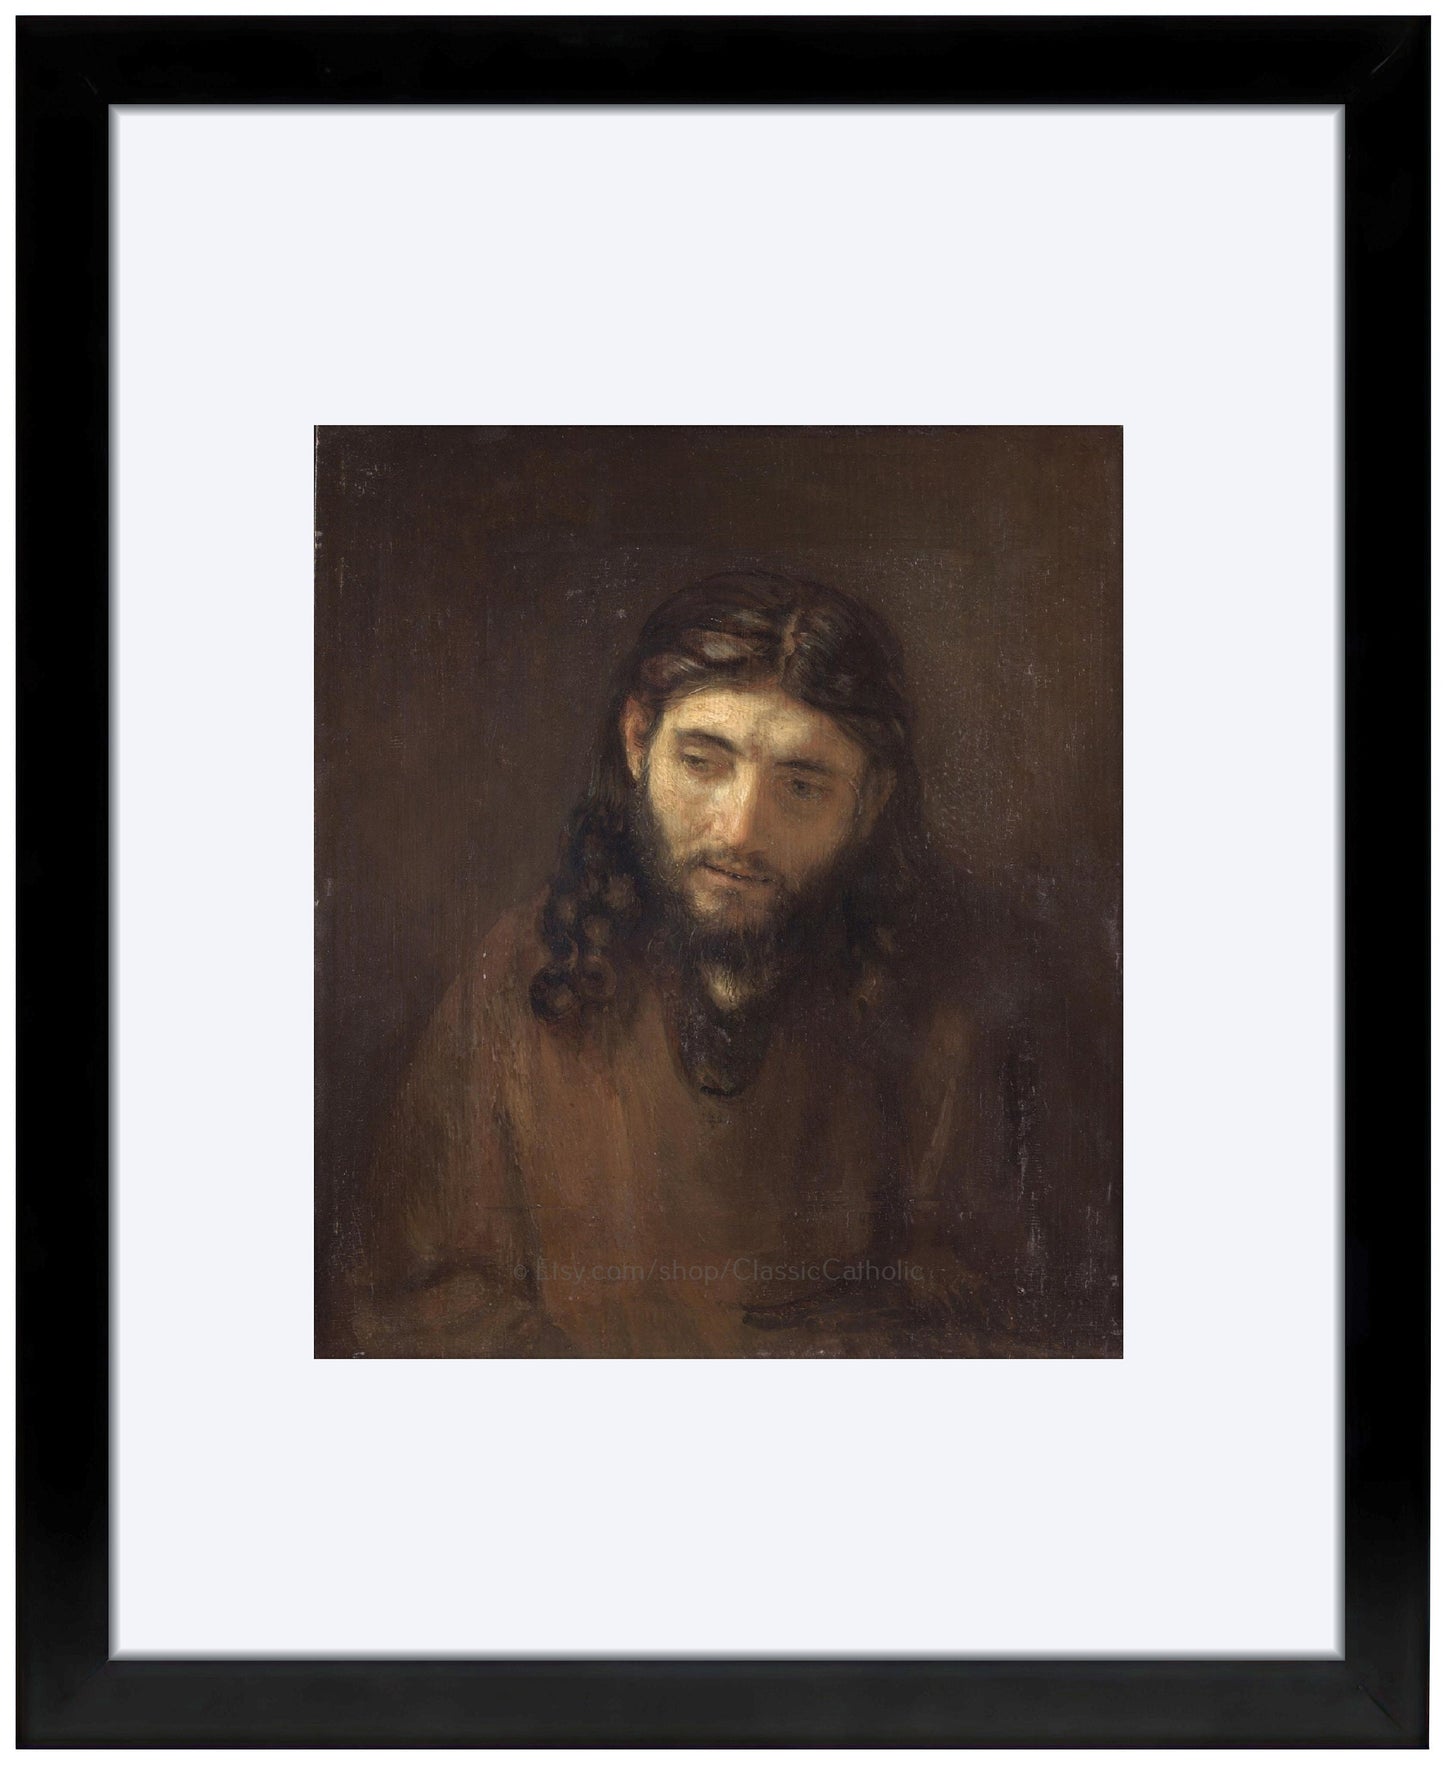 Head of Christ by Rembrandt - Portrait of Jesus Christ - Print - Christian Art - Catholic Gifts - Archival Print in Three Sizes